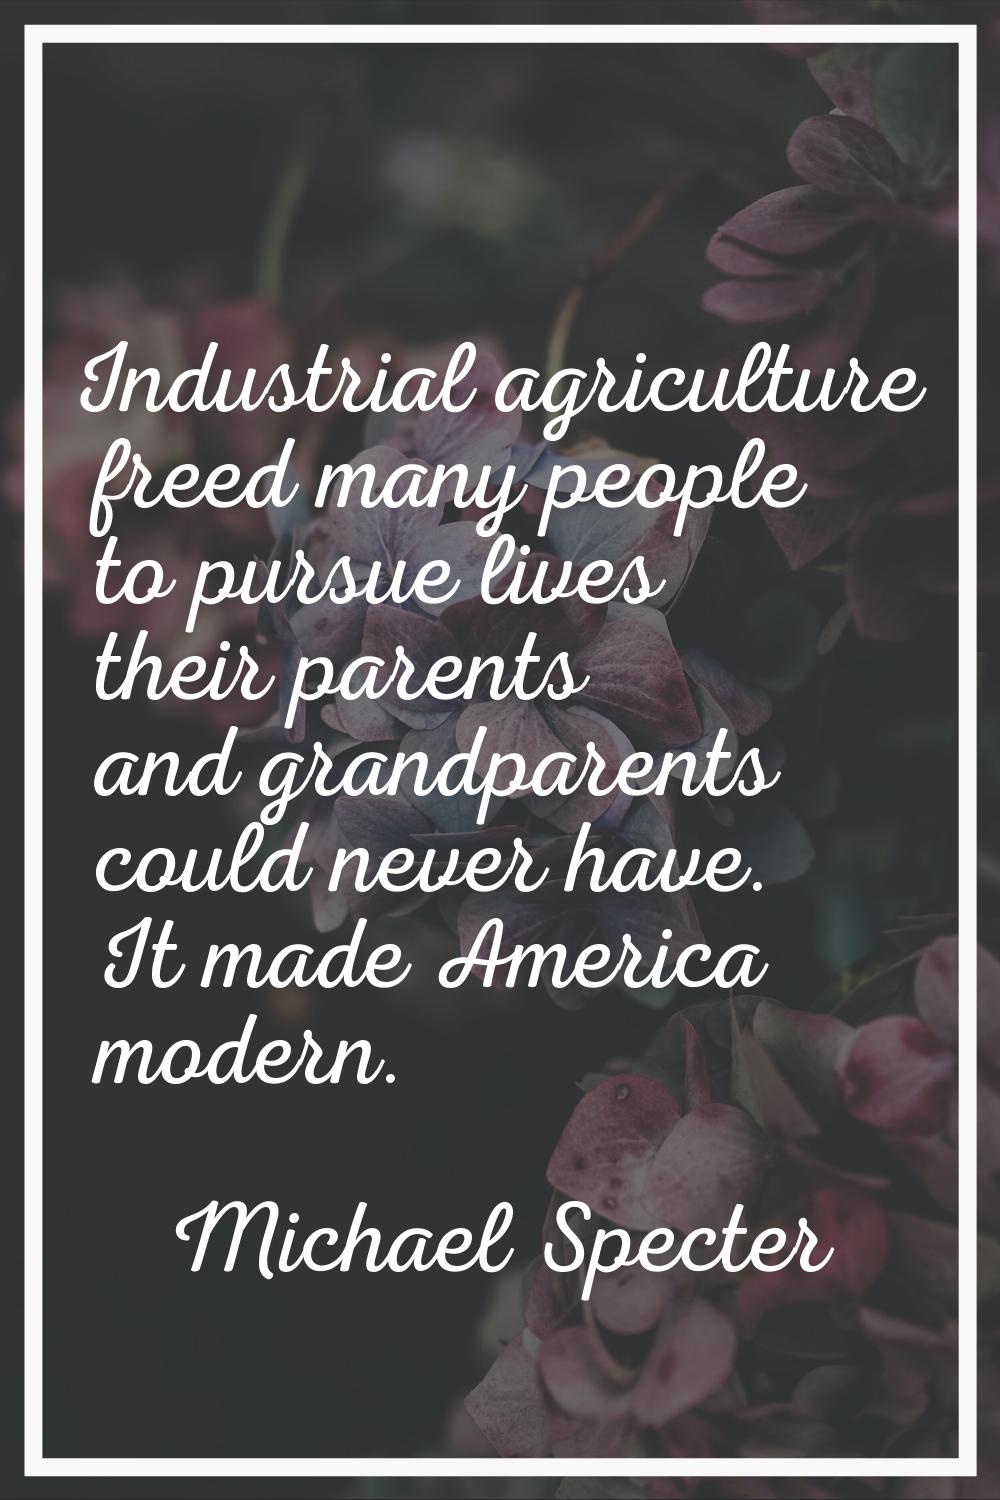 Industrial agriculture freed many people to pursue lives their parents and grandparents could never